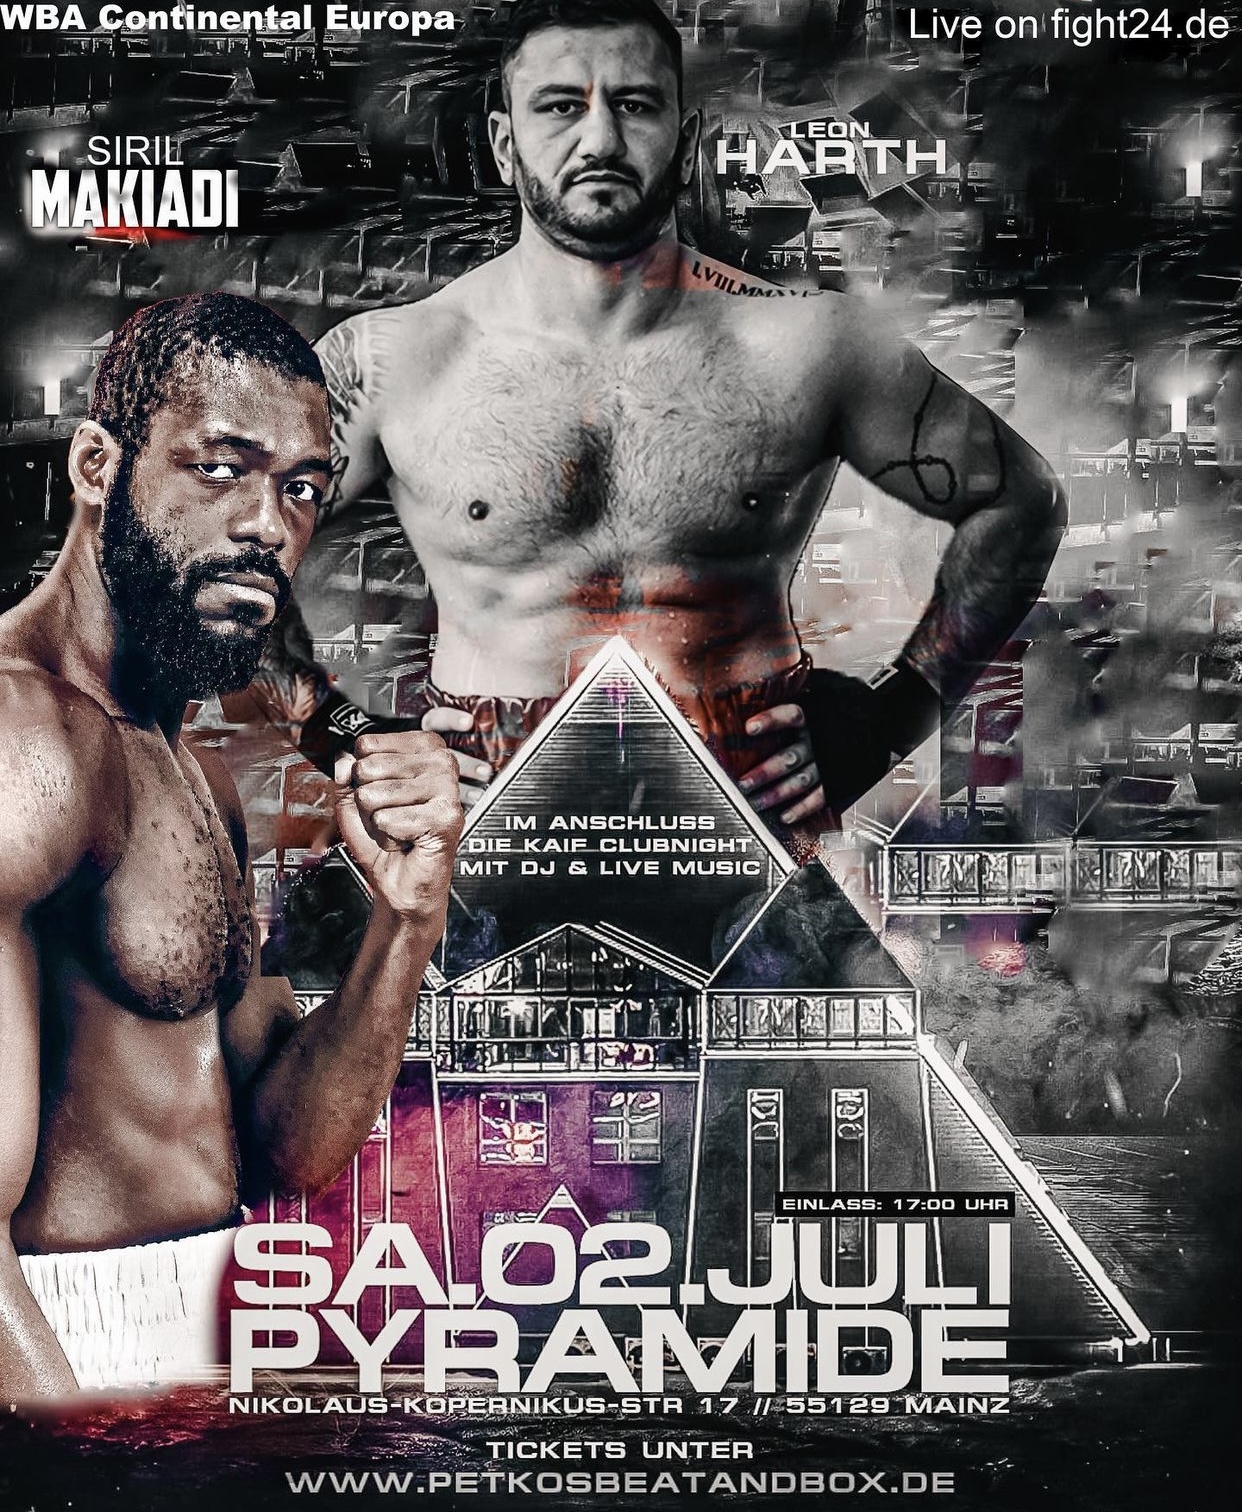 Makiadi-Harth for the WBA Continental belt this Saturday in Germany